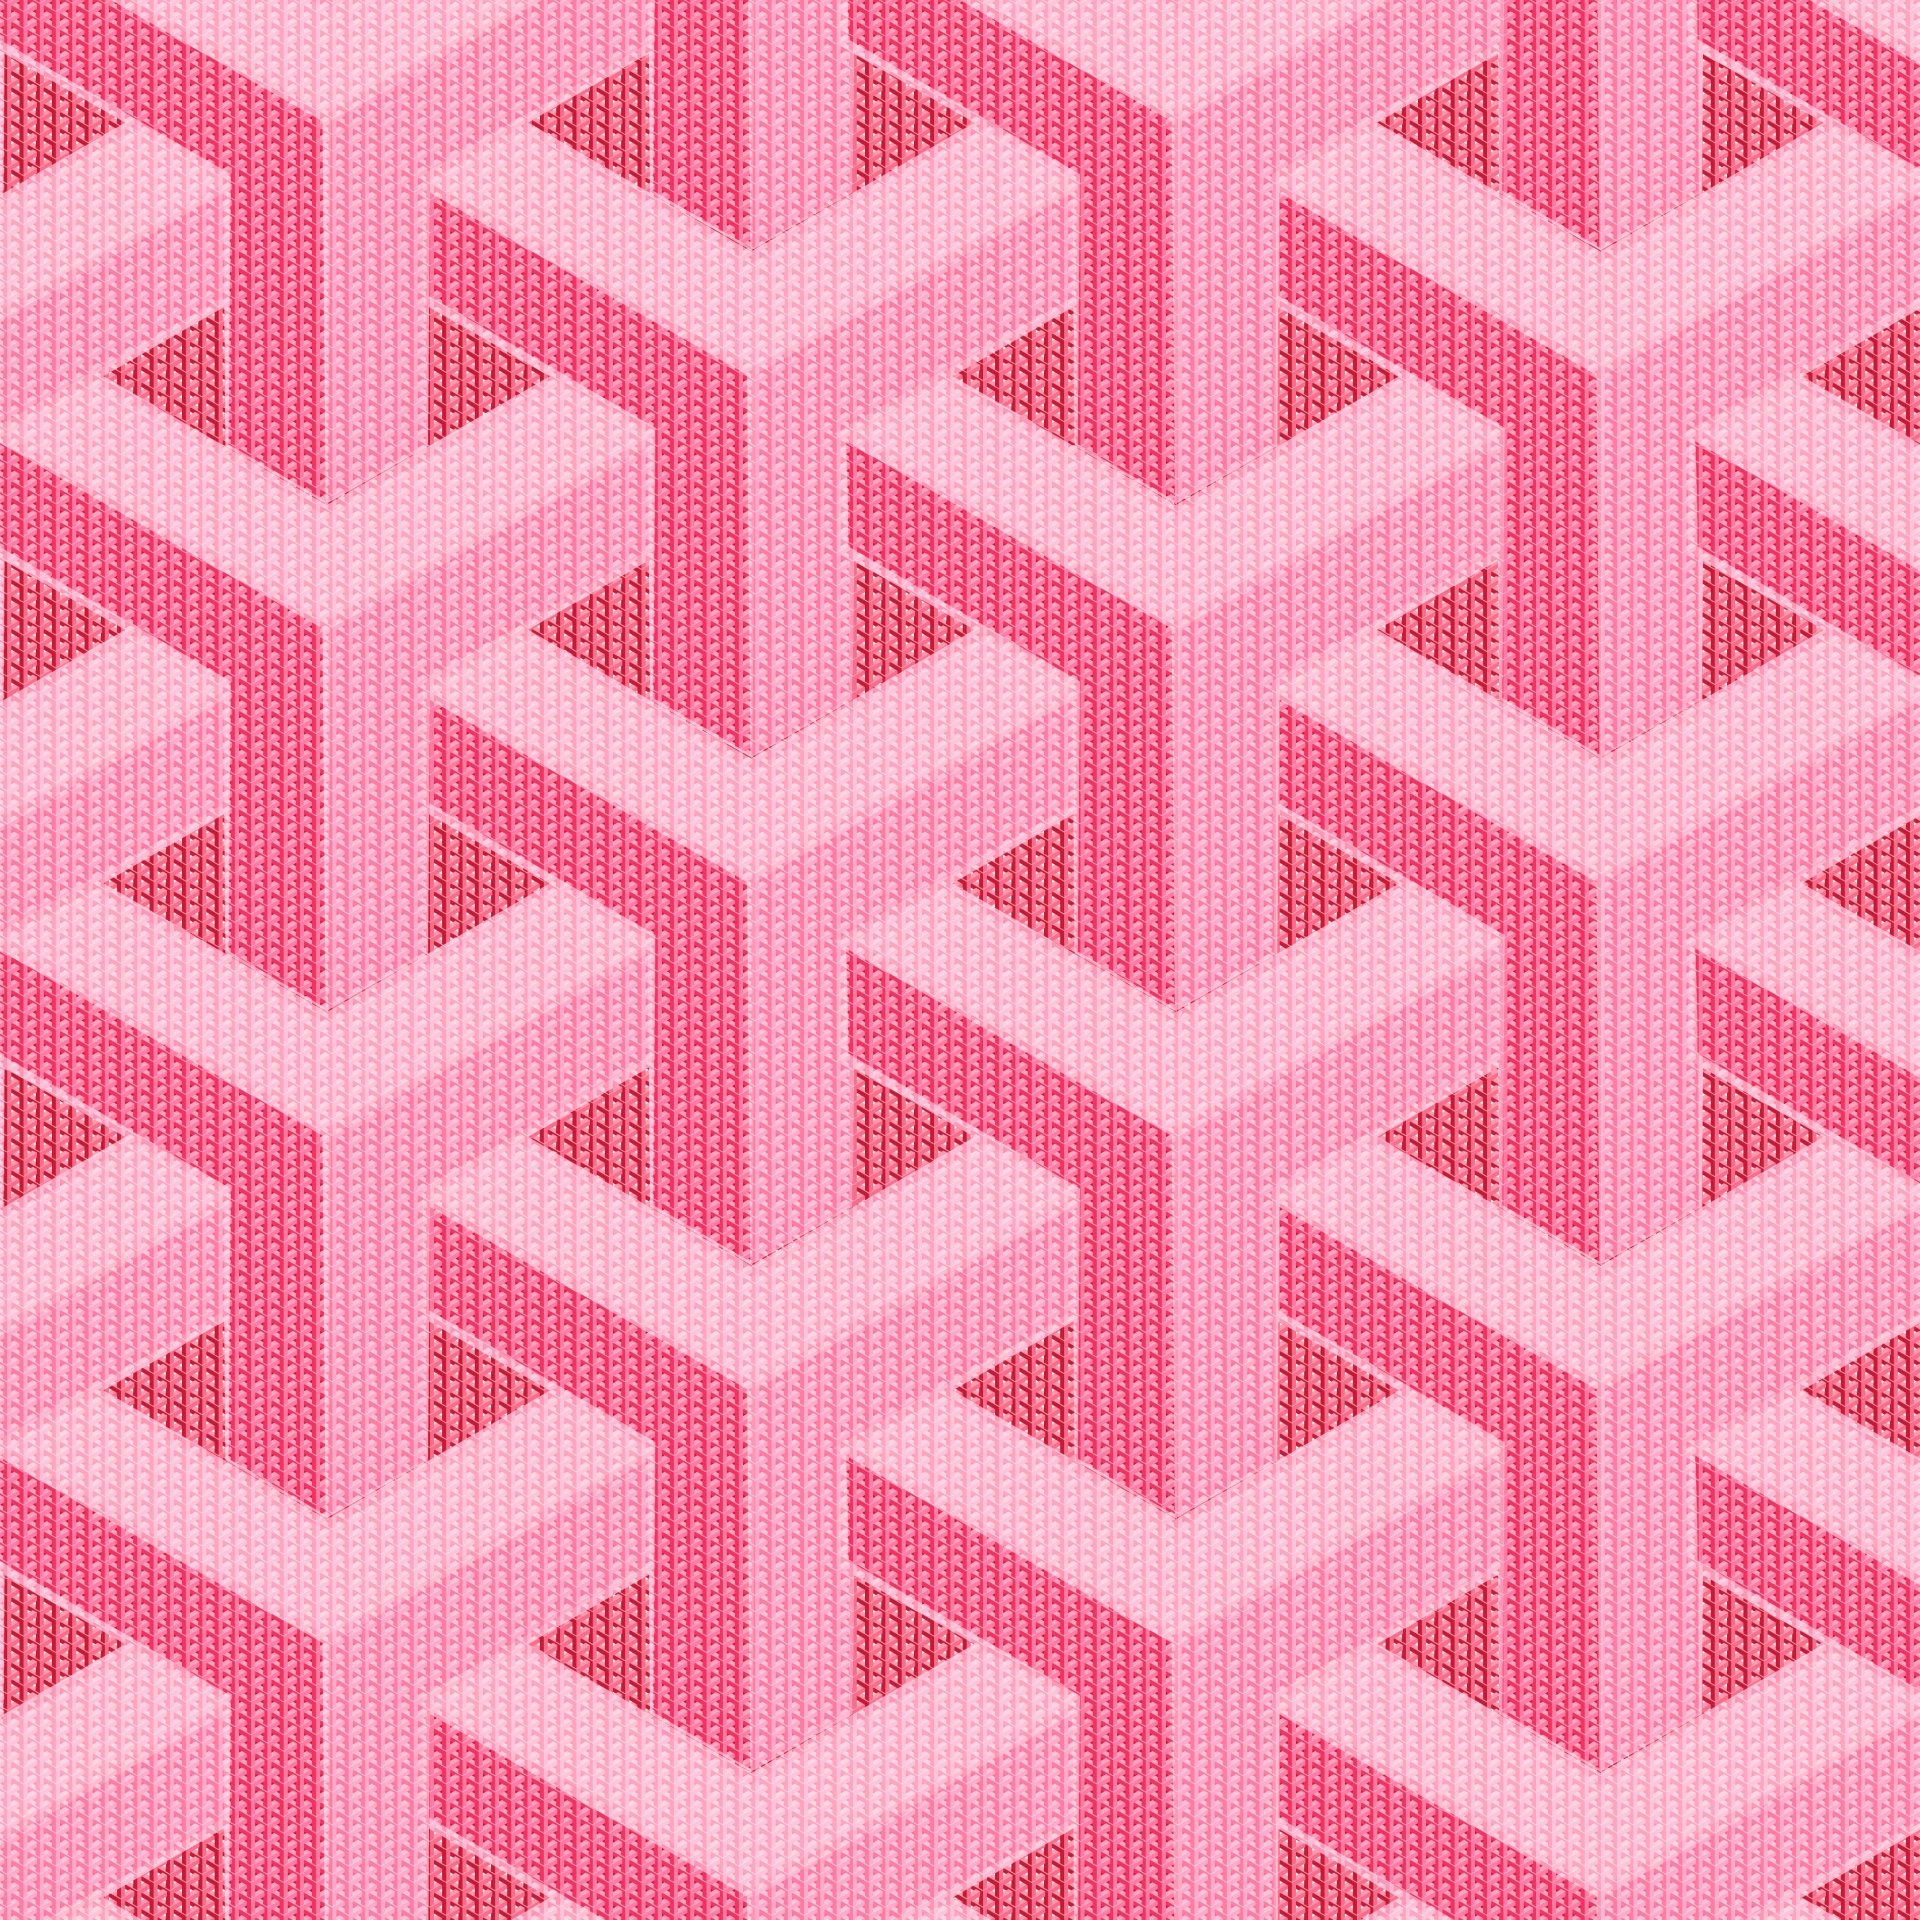 abstract repeating pattern of pink textured geometric shapes, knitting texture background